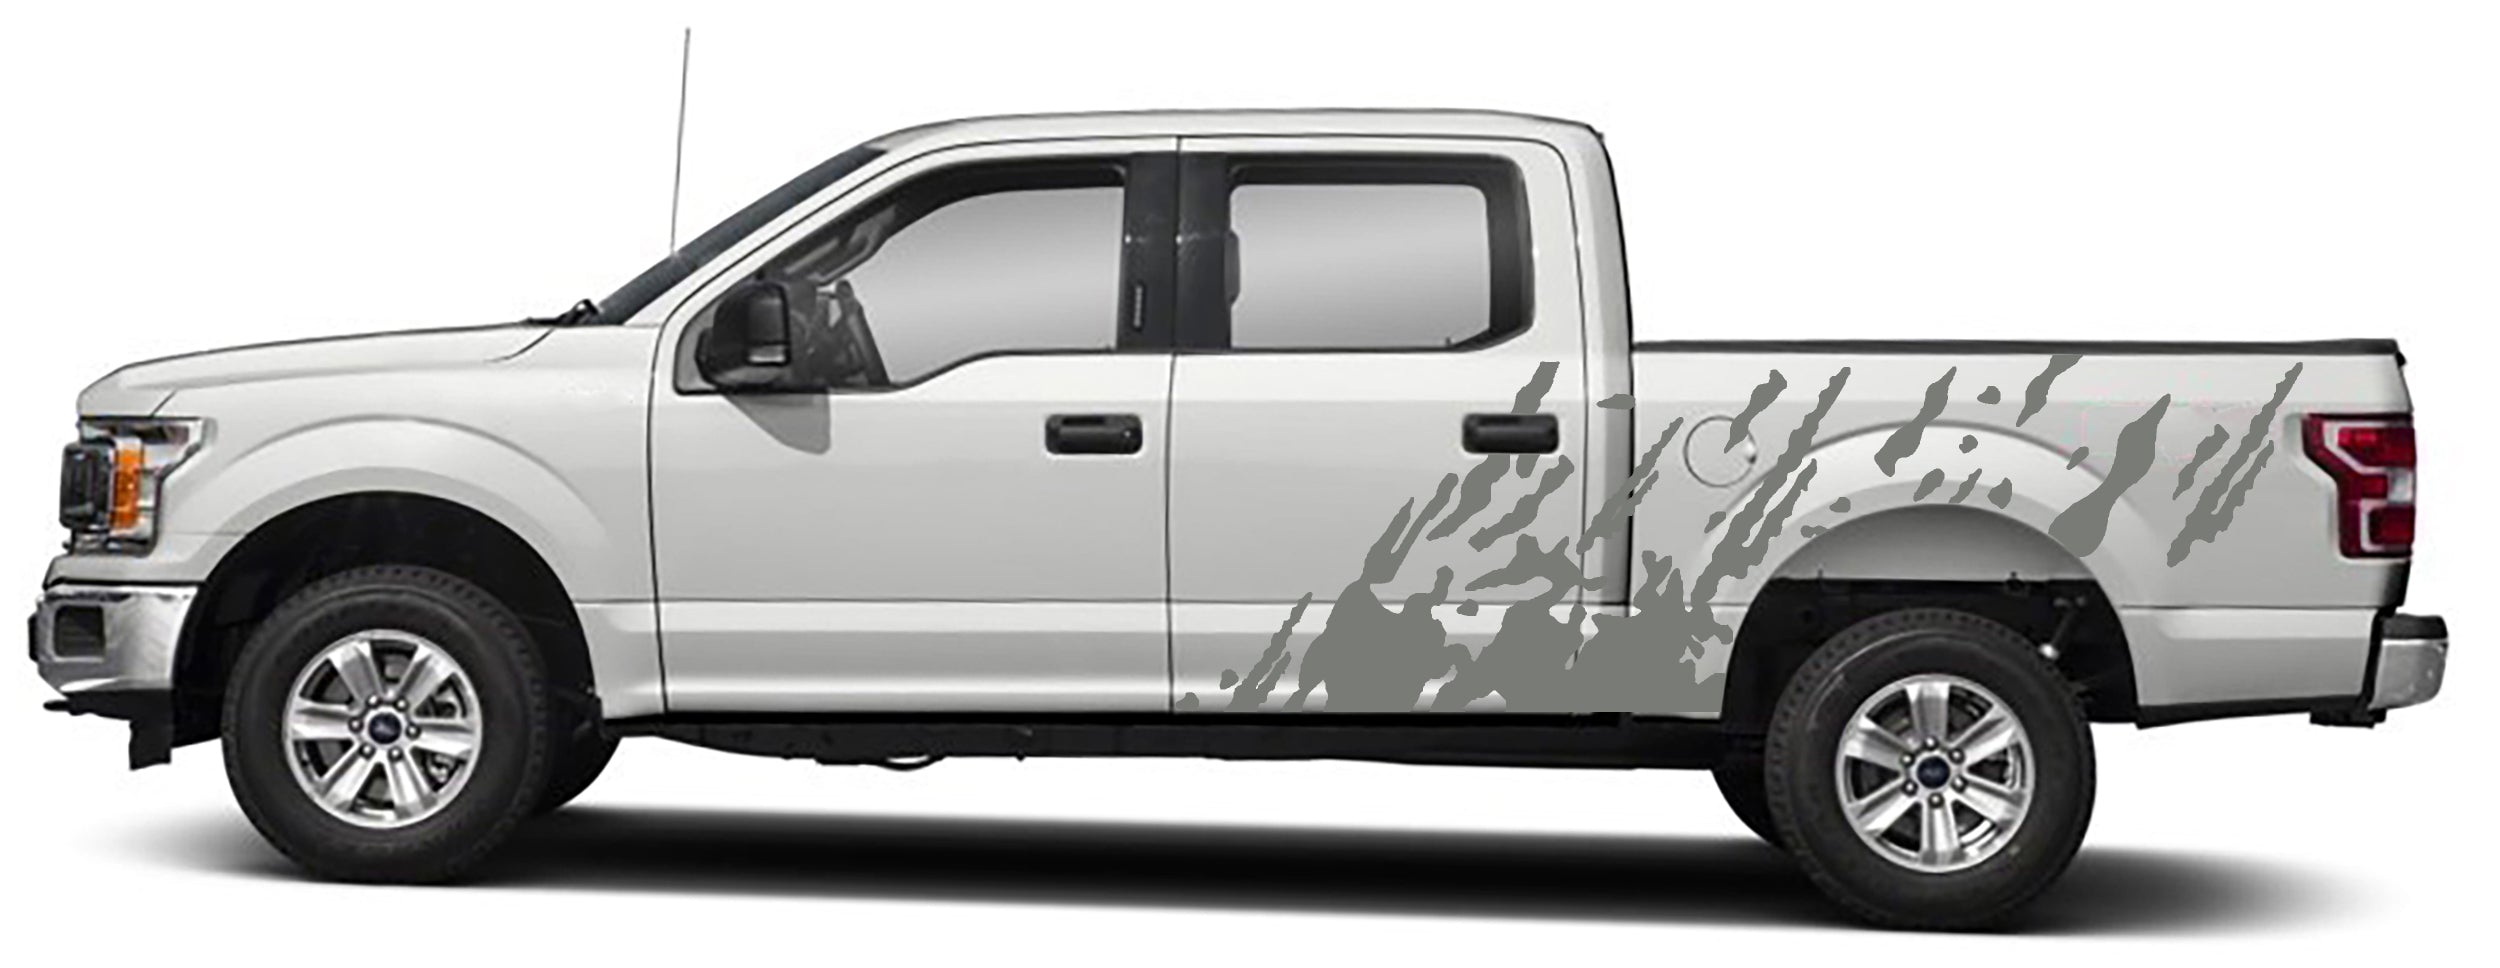 mud splash side graphics for ford f 150 2015 to 2020 models gray